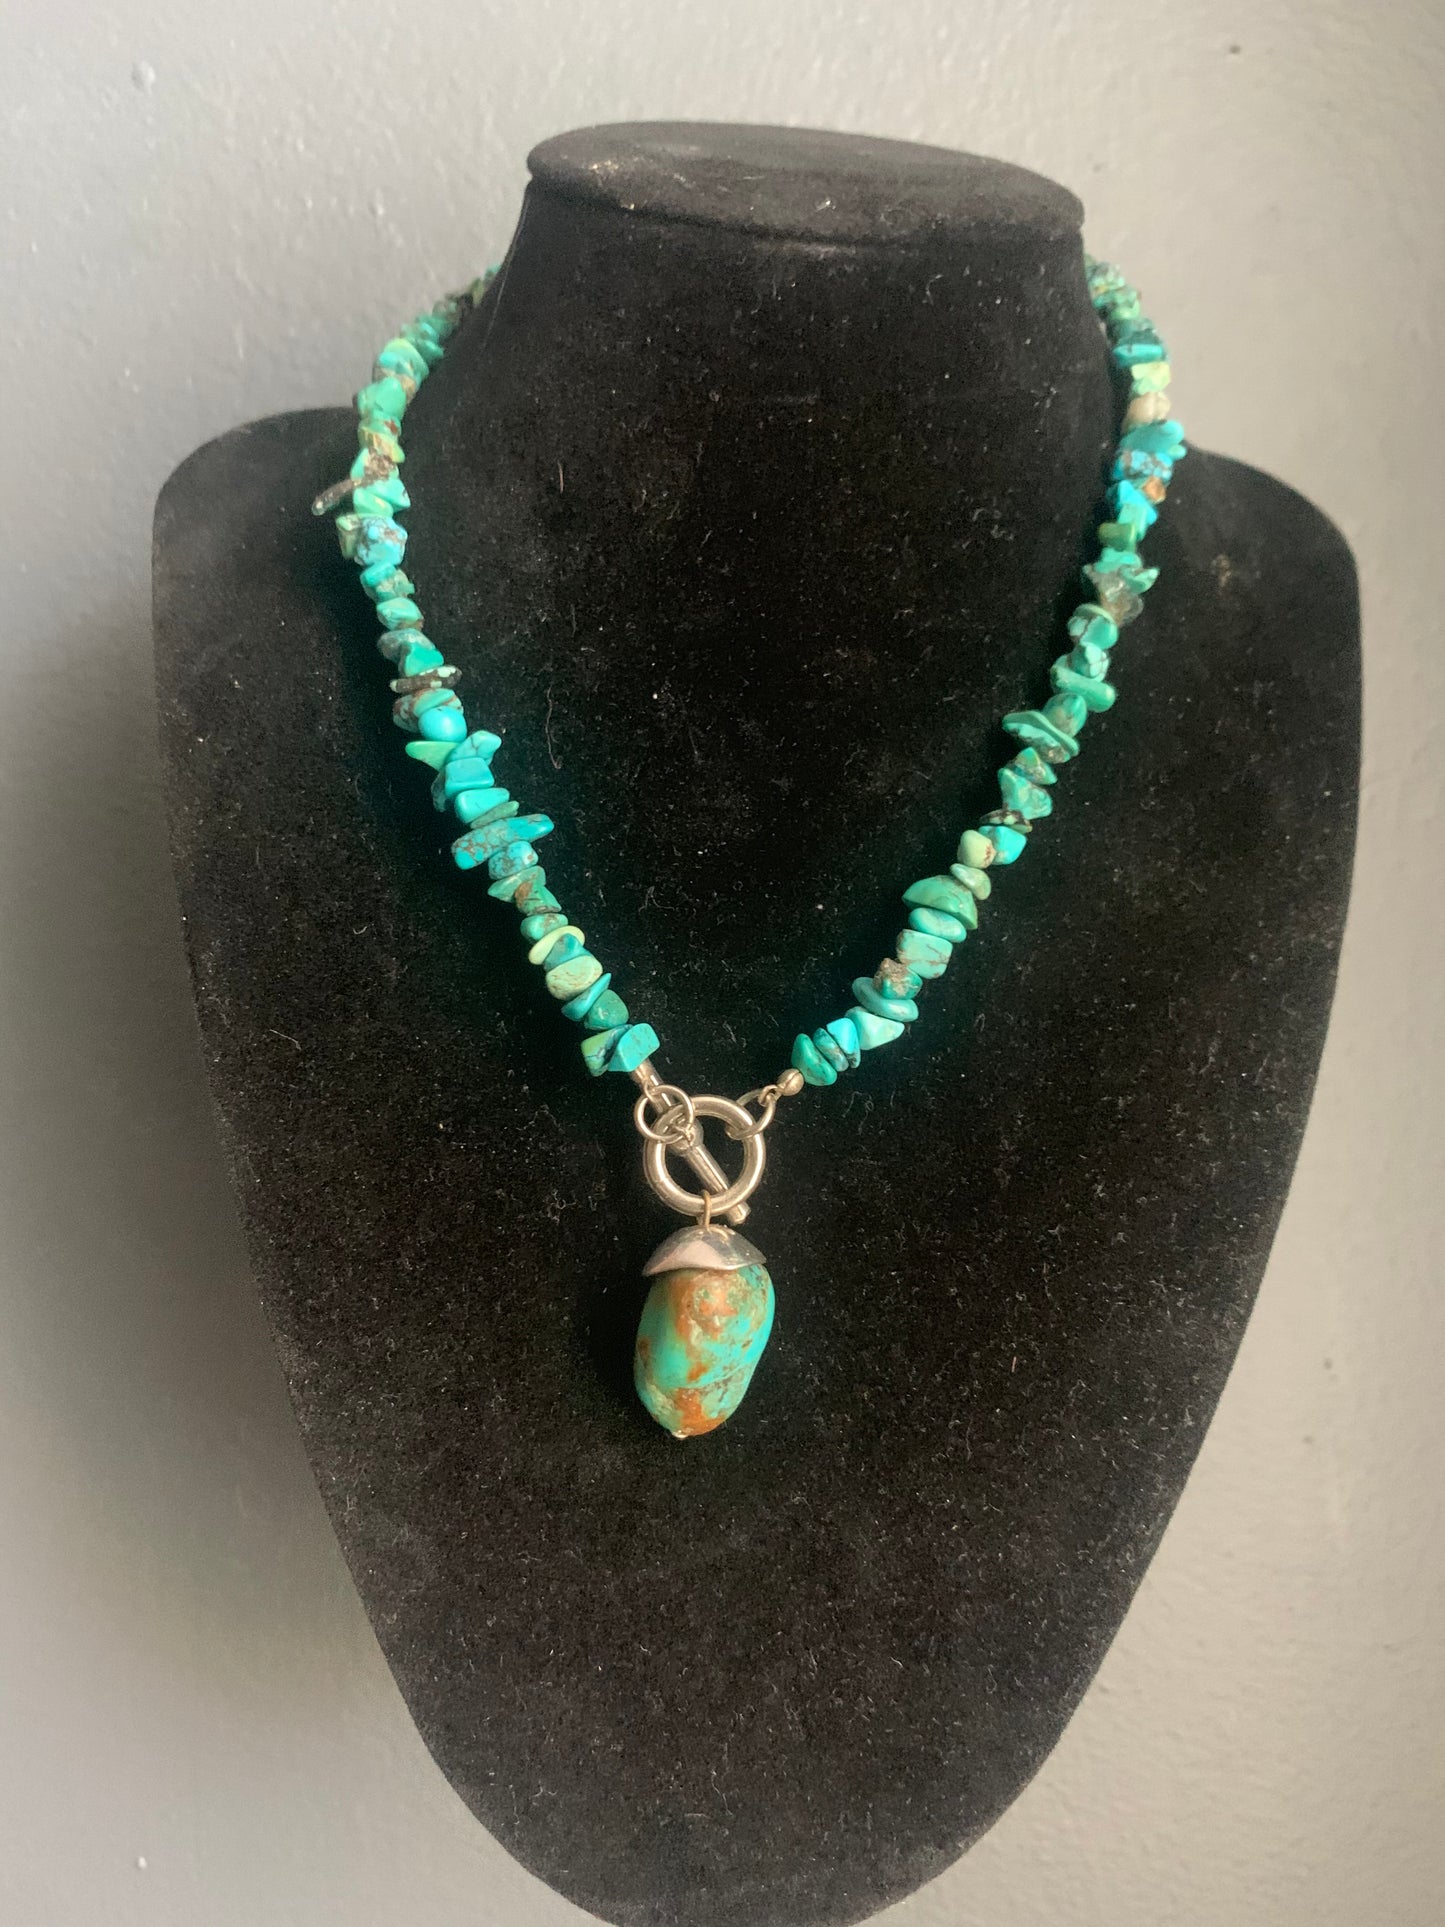 A turquoise necklace and pendant